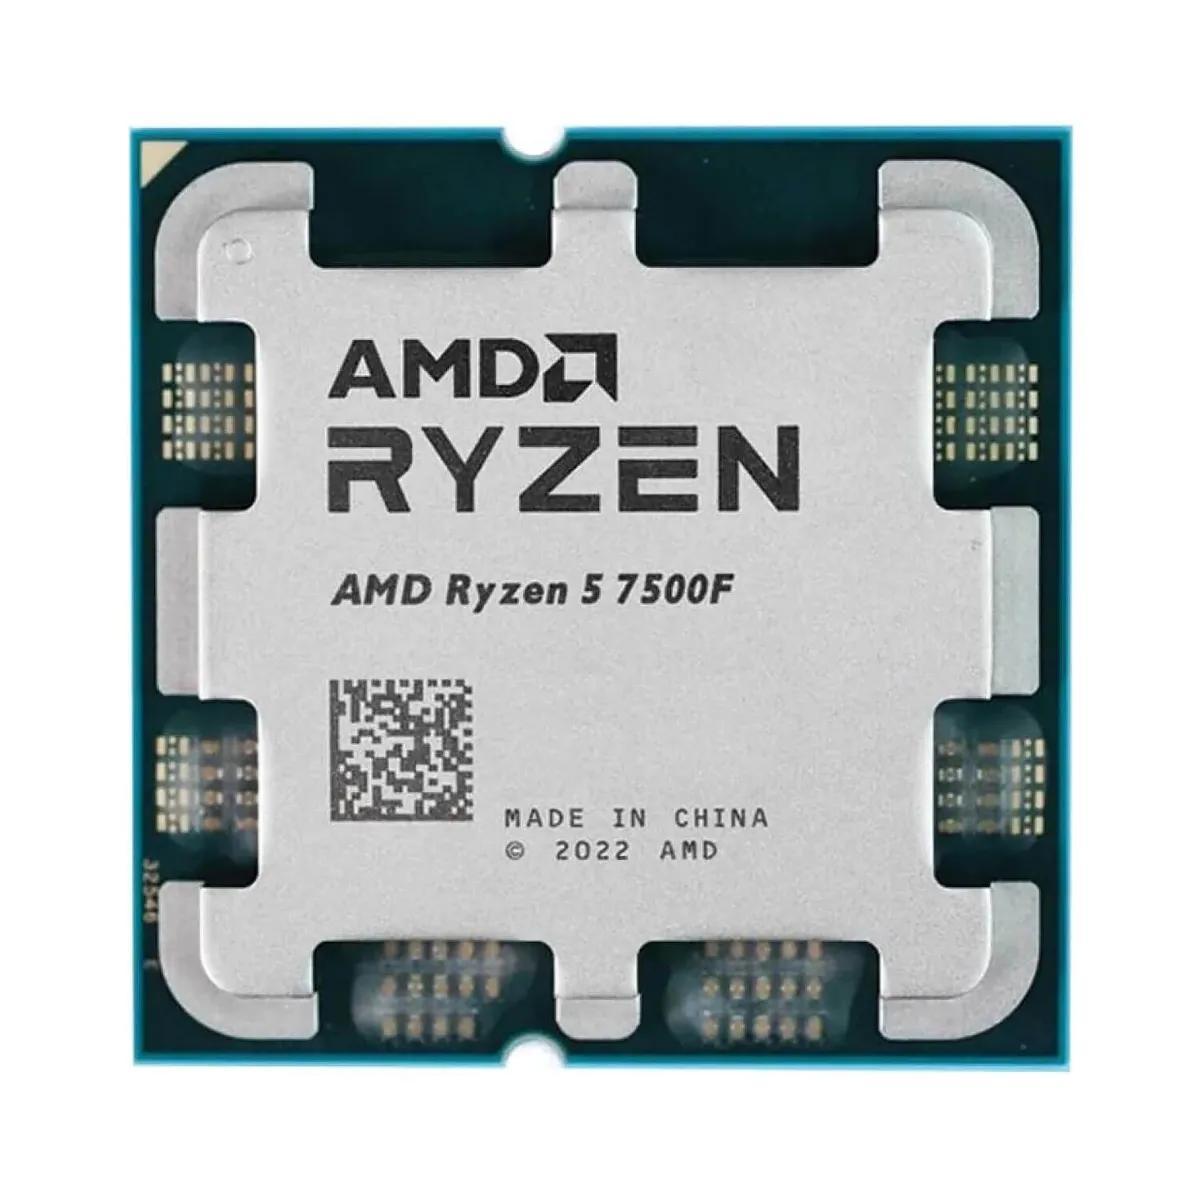 The AMD Ryzen 5 7500F is the best budget Gaming CPU in 2024 with 6 cores, 12 threads, high clock speeds, plentiful L2 & L3 cache, and abnormally good power efficiency while still delivering excellent frame rate. If you're unable to purchase a 7500F in your region, then a 7600 is the exact same as a 7500F just without integrated Radeon graphics.